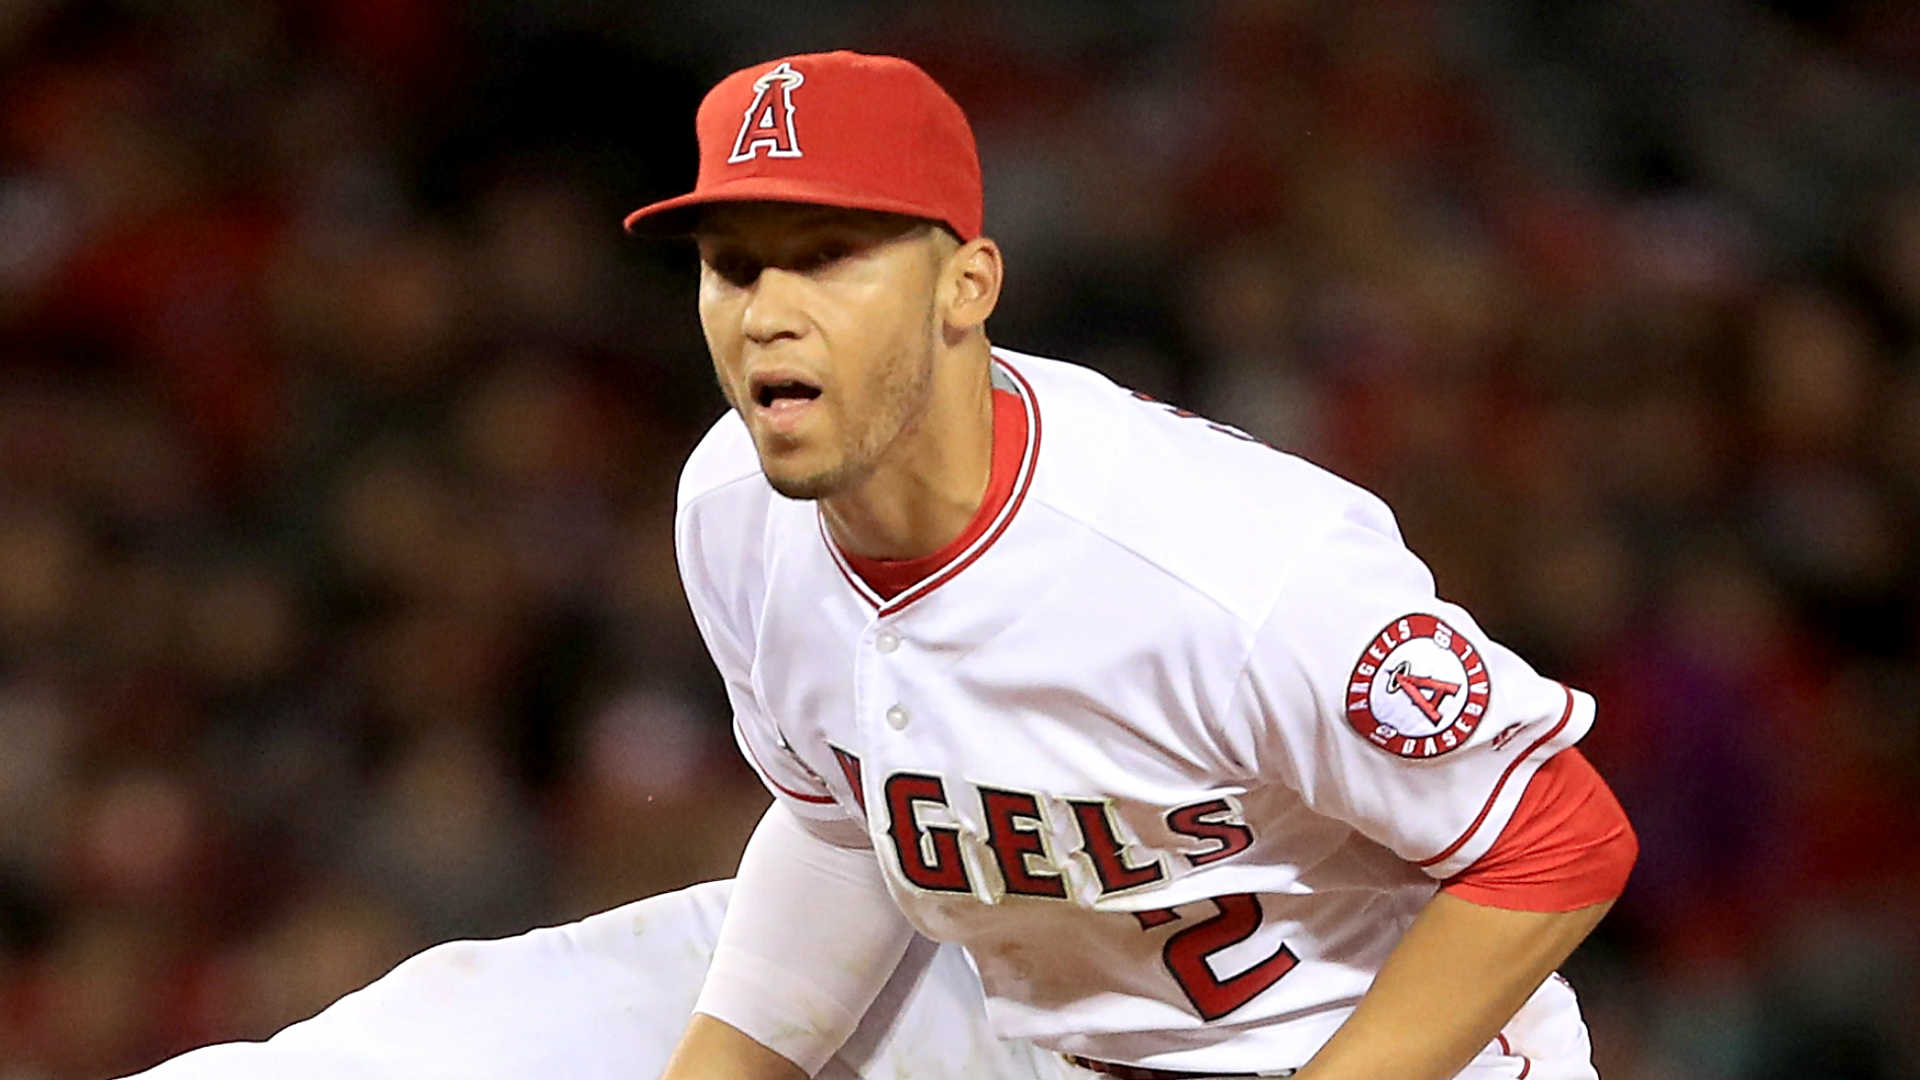 Andrelton Simmons Could Miss Months With Ankle Sprain Sporting